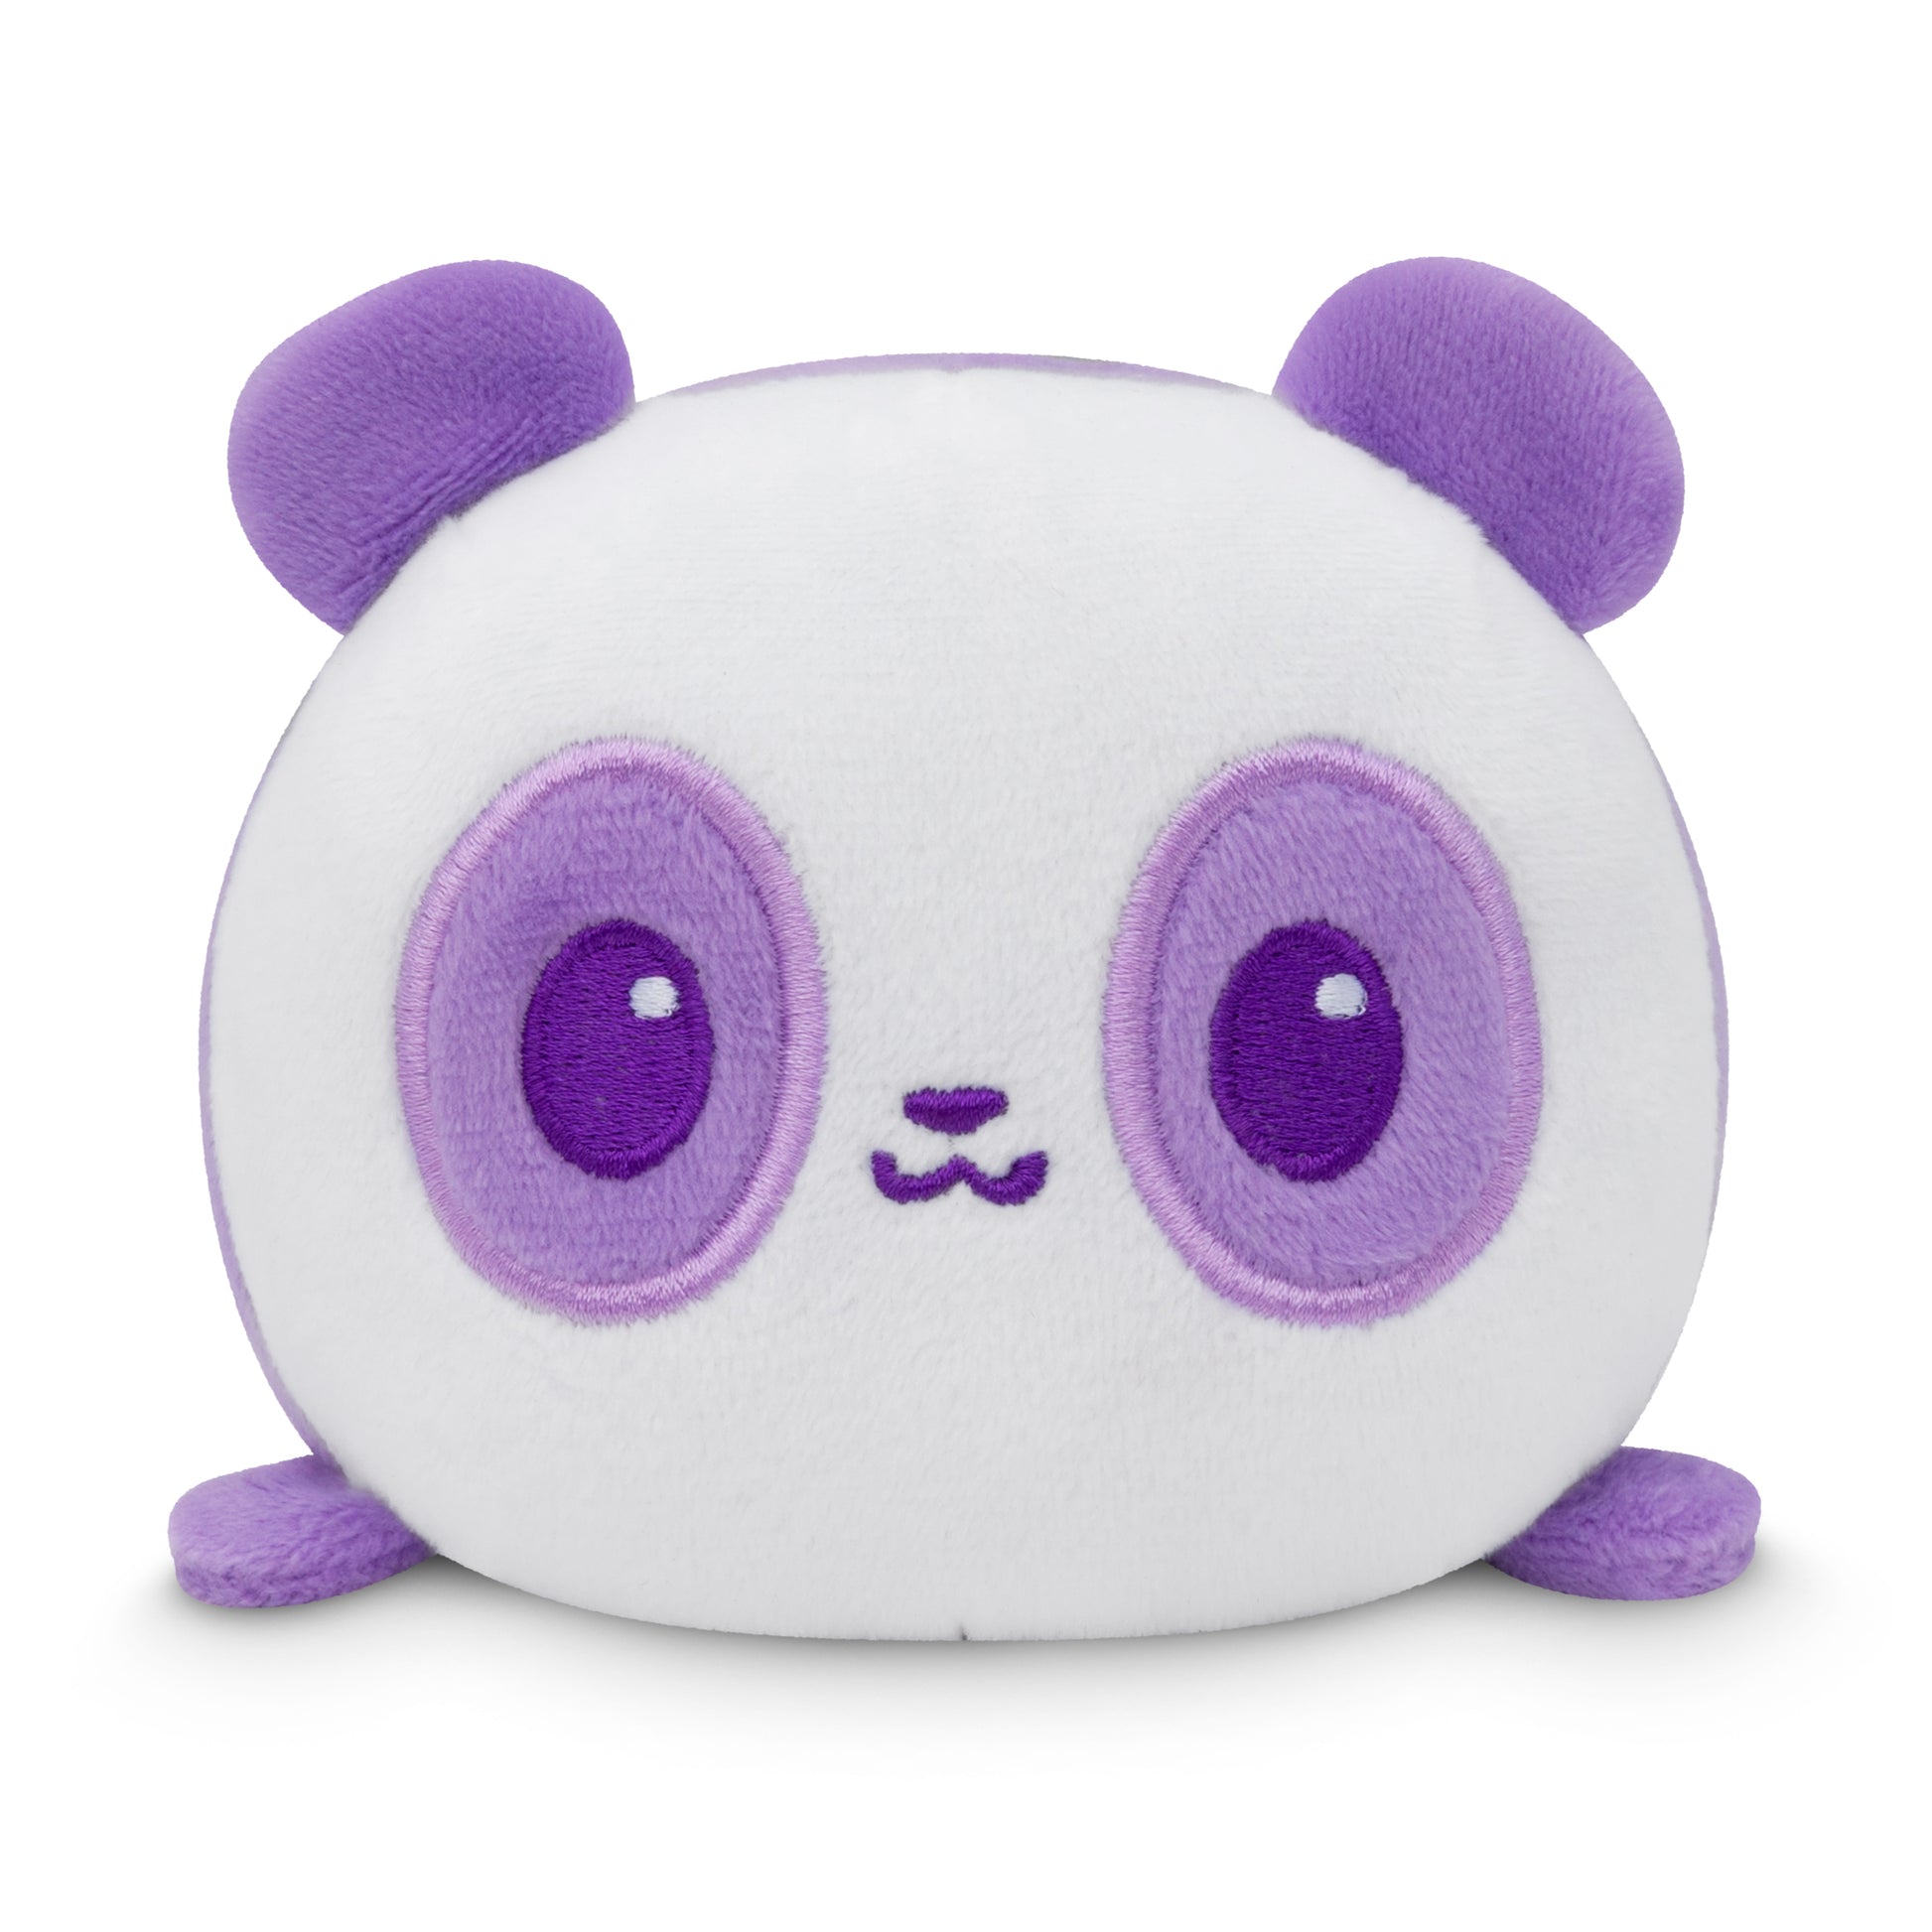 A TeeTurtle Plushiverse Bobalicious Panda Plushie Tote Bag with large purple eyes and small ears.